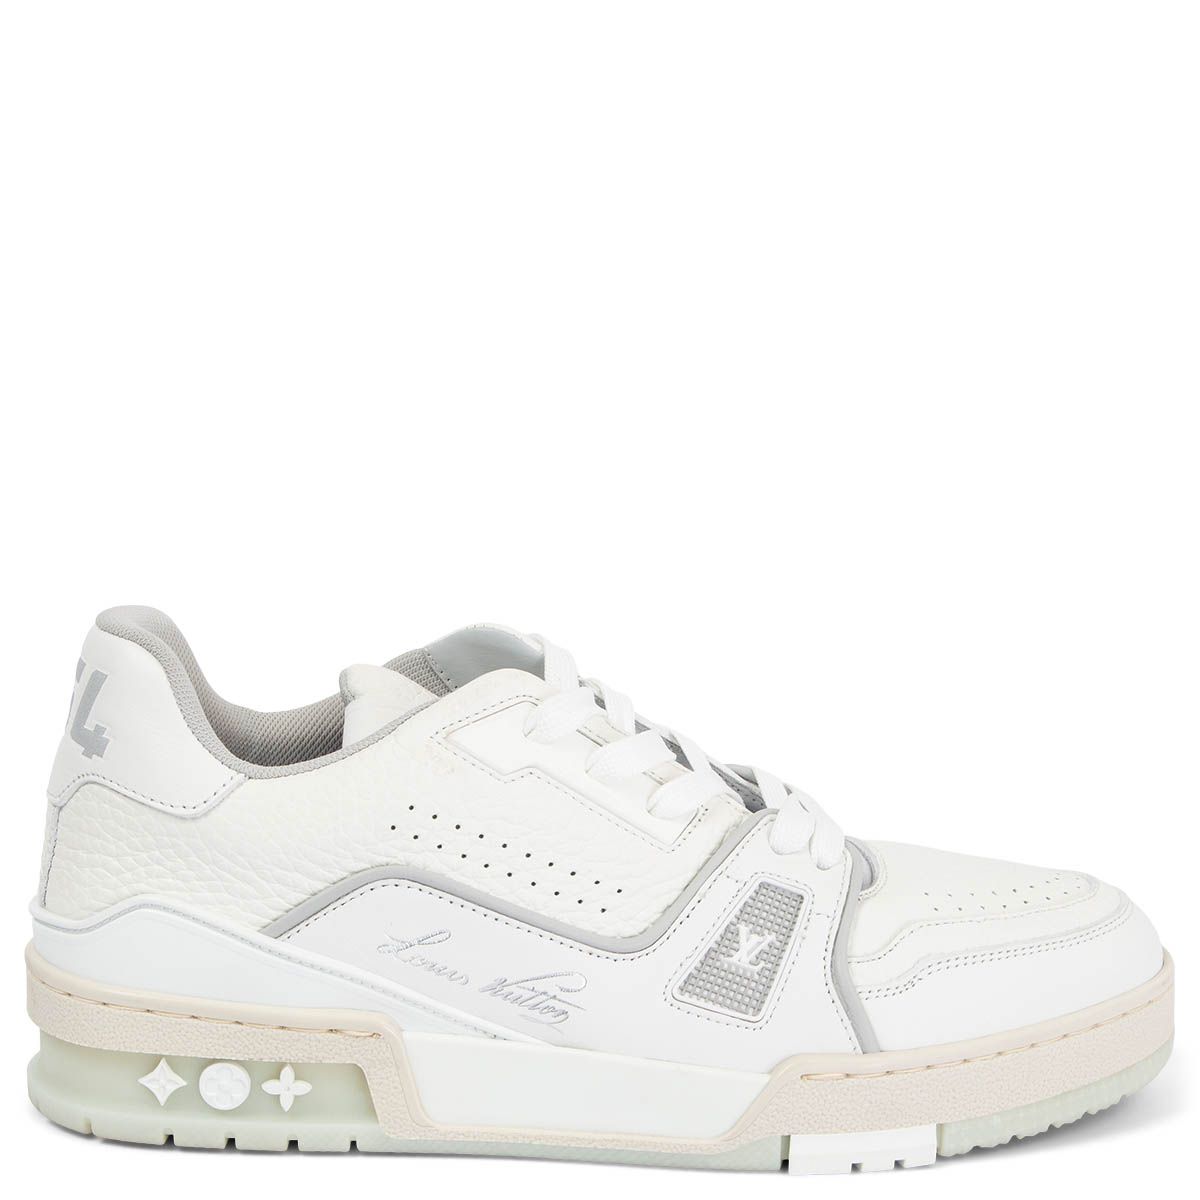 Adulthood Faial unit Louis Vuitton LV Trainer Sneakers White/Grey